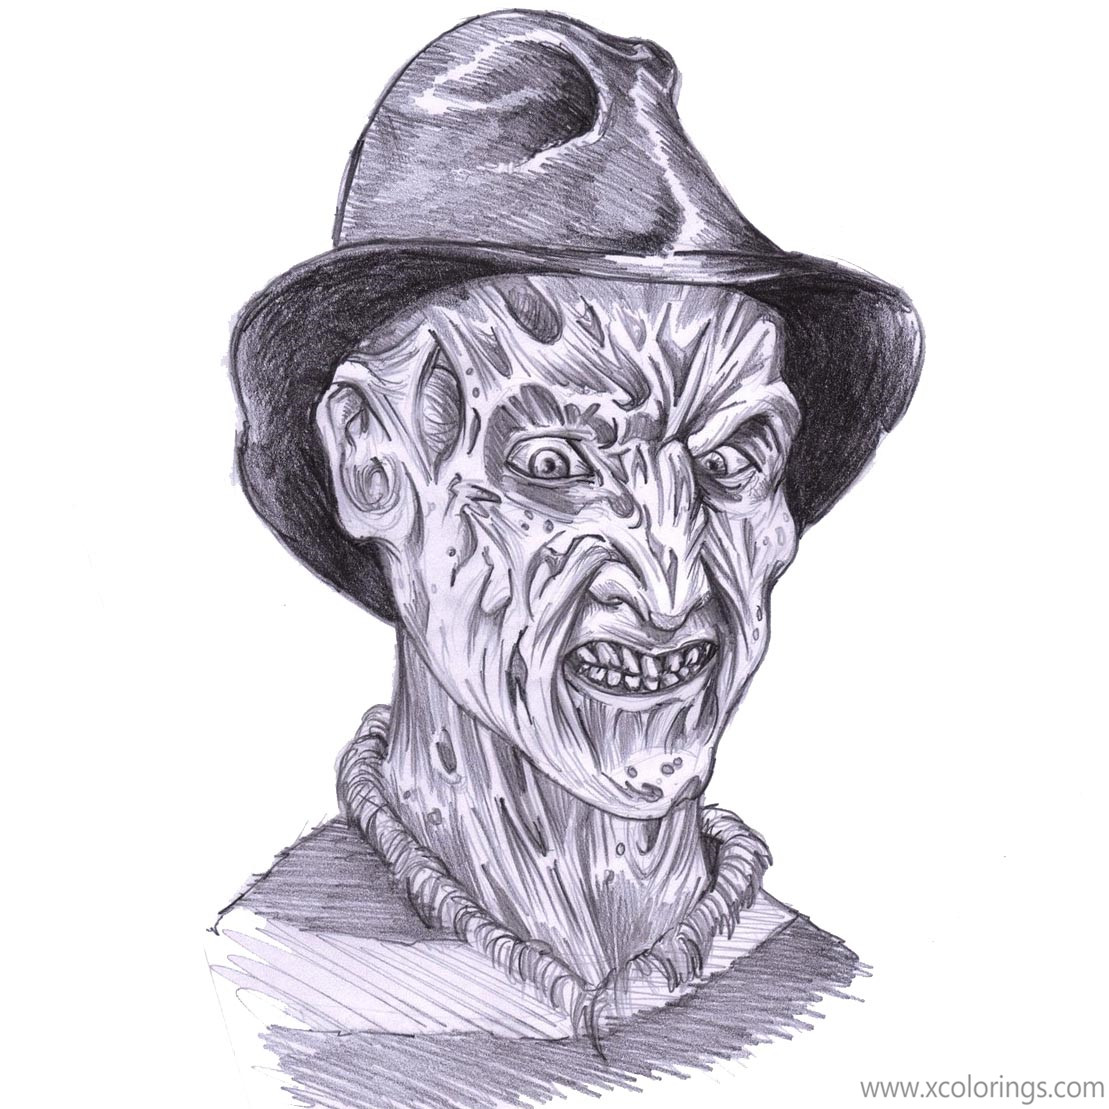 Free Freddy Krueger Coloring Pages Pencil Drawing printable